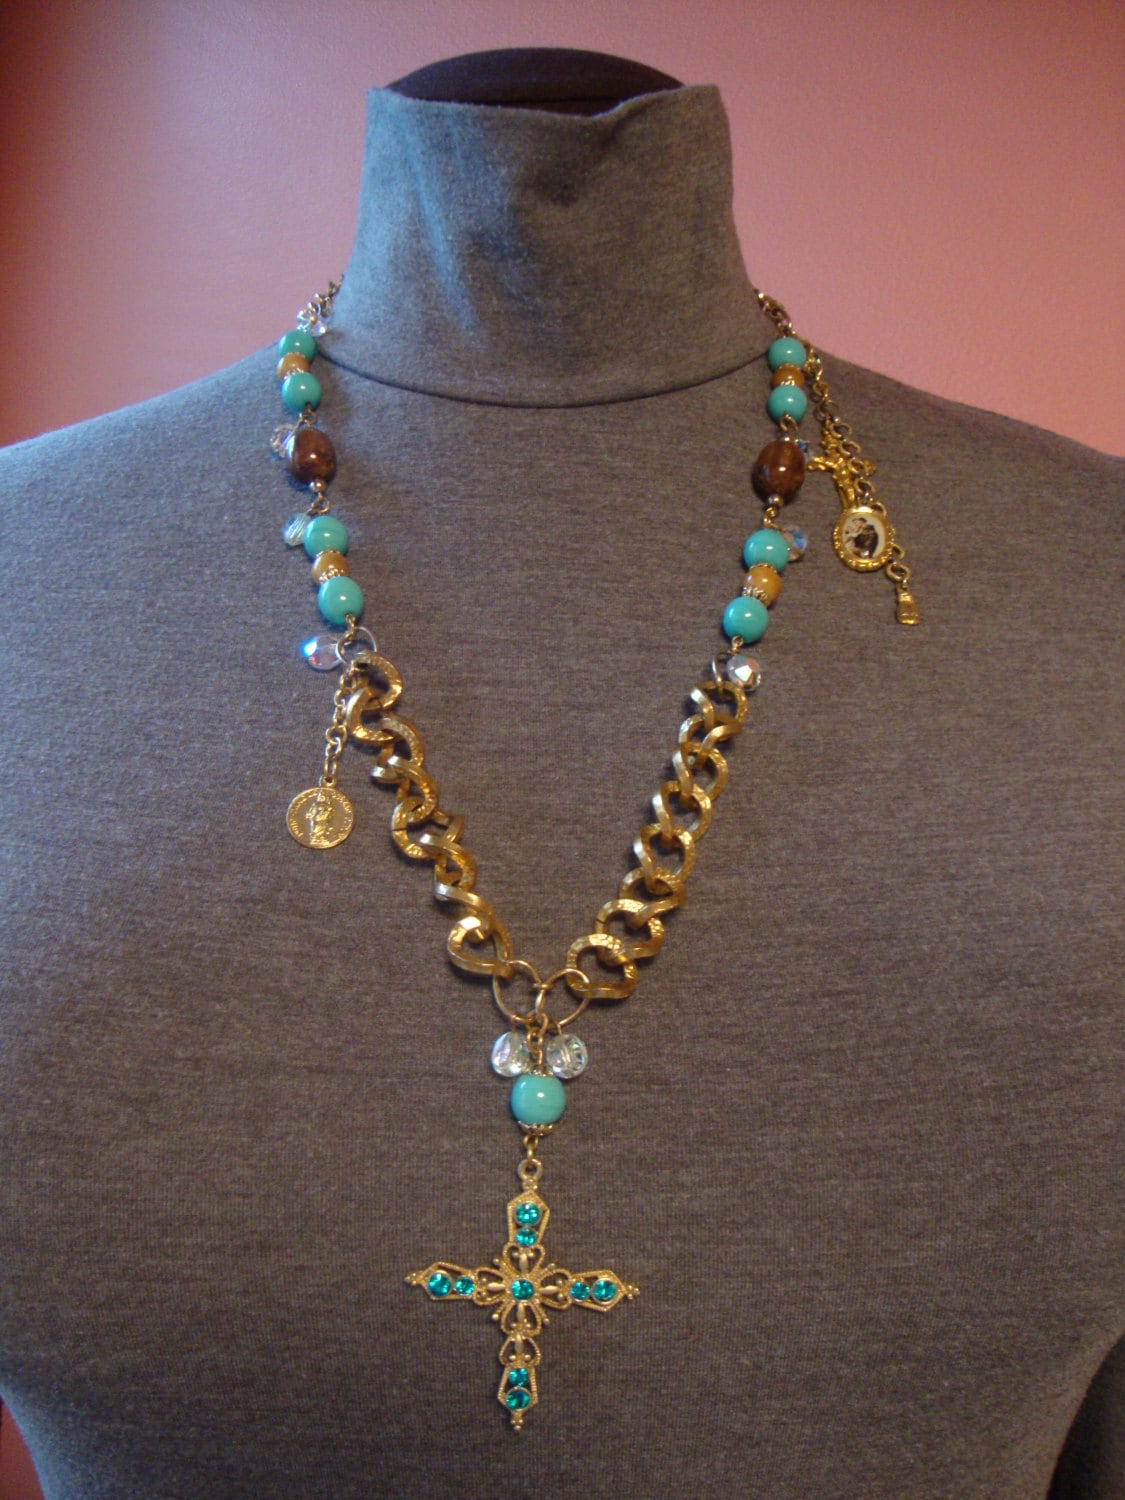 Turquoise Cross by VeniceGalDesigns on Etsy